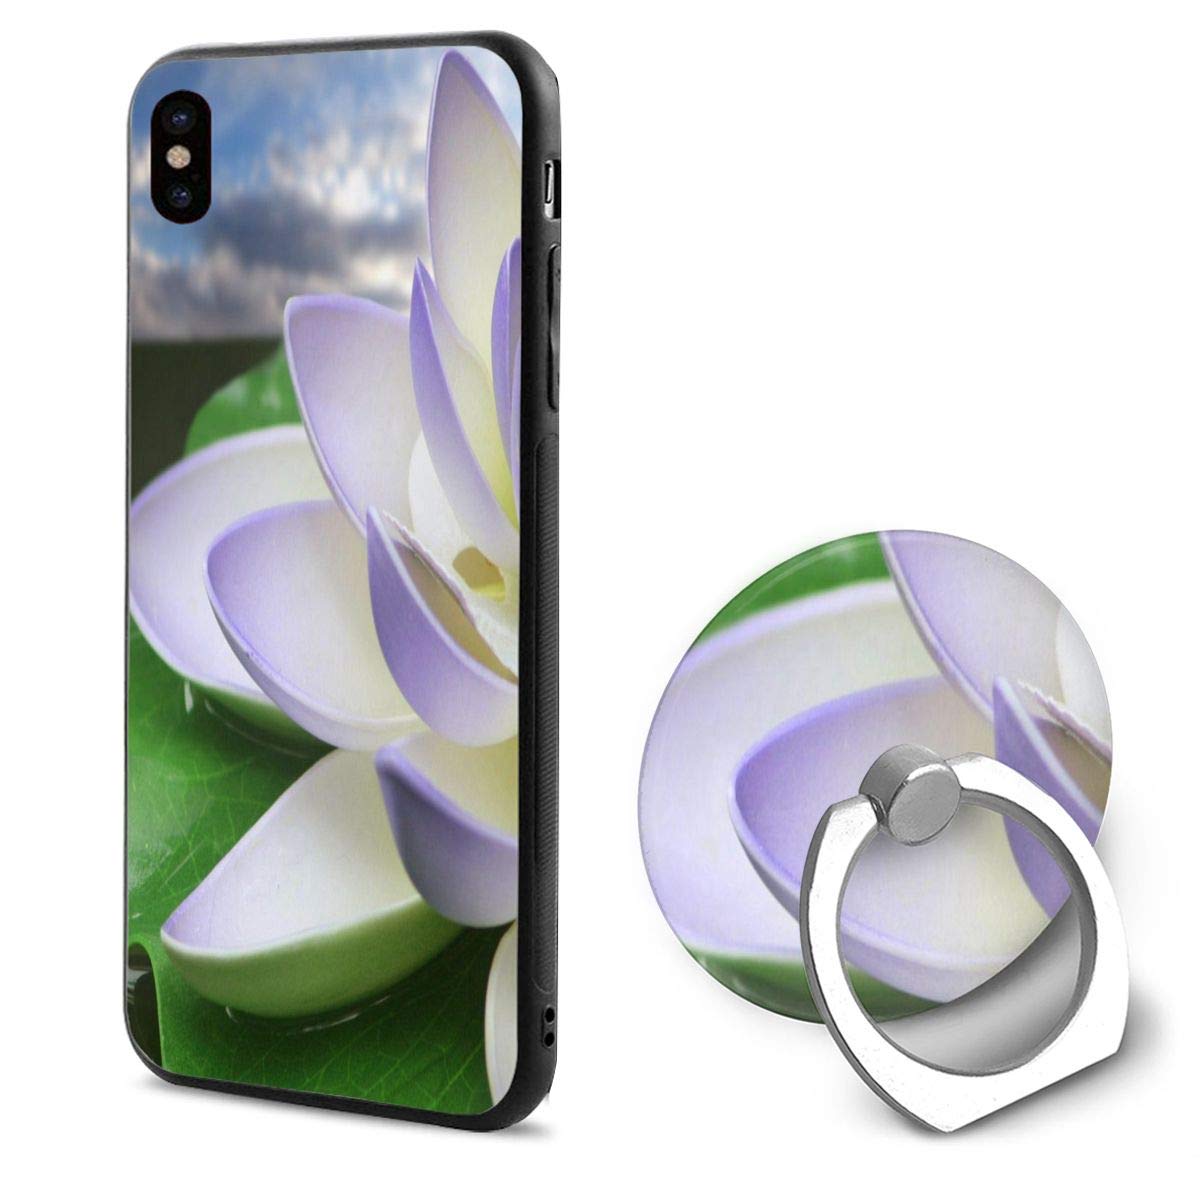 Phone X Case Lotus Flower Wallpapers Ring Cell Phone - マシュメロ おしゃれ , HD Wallpaper & Backgrounds